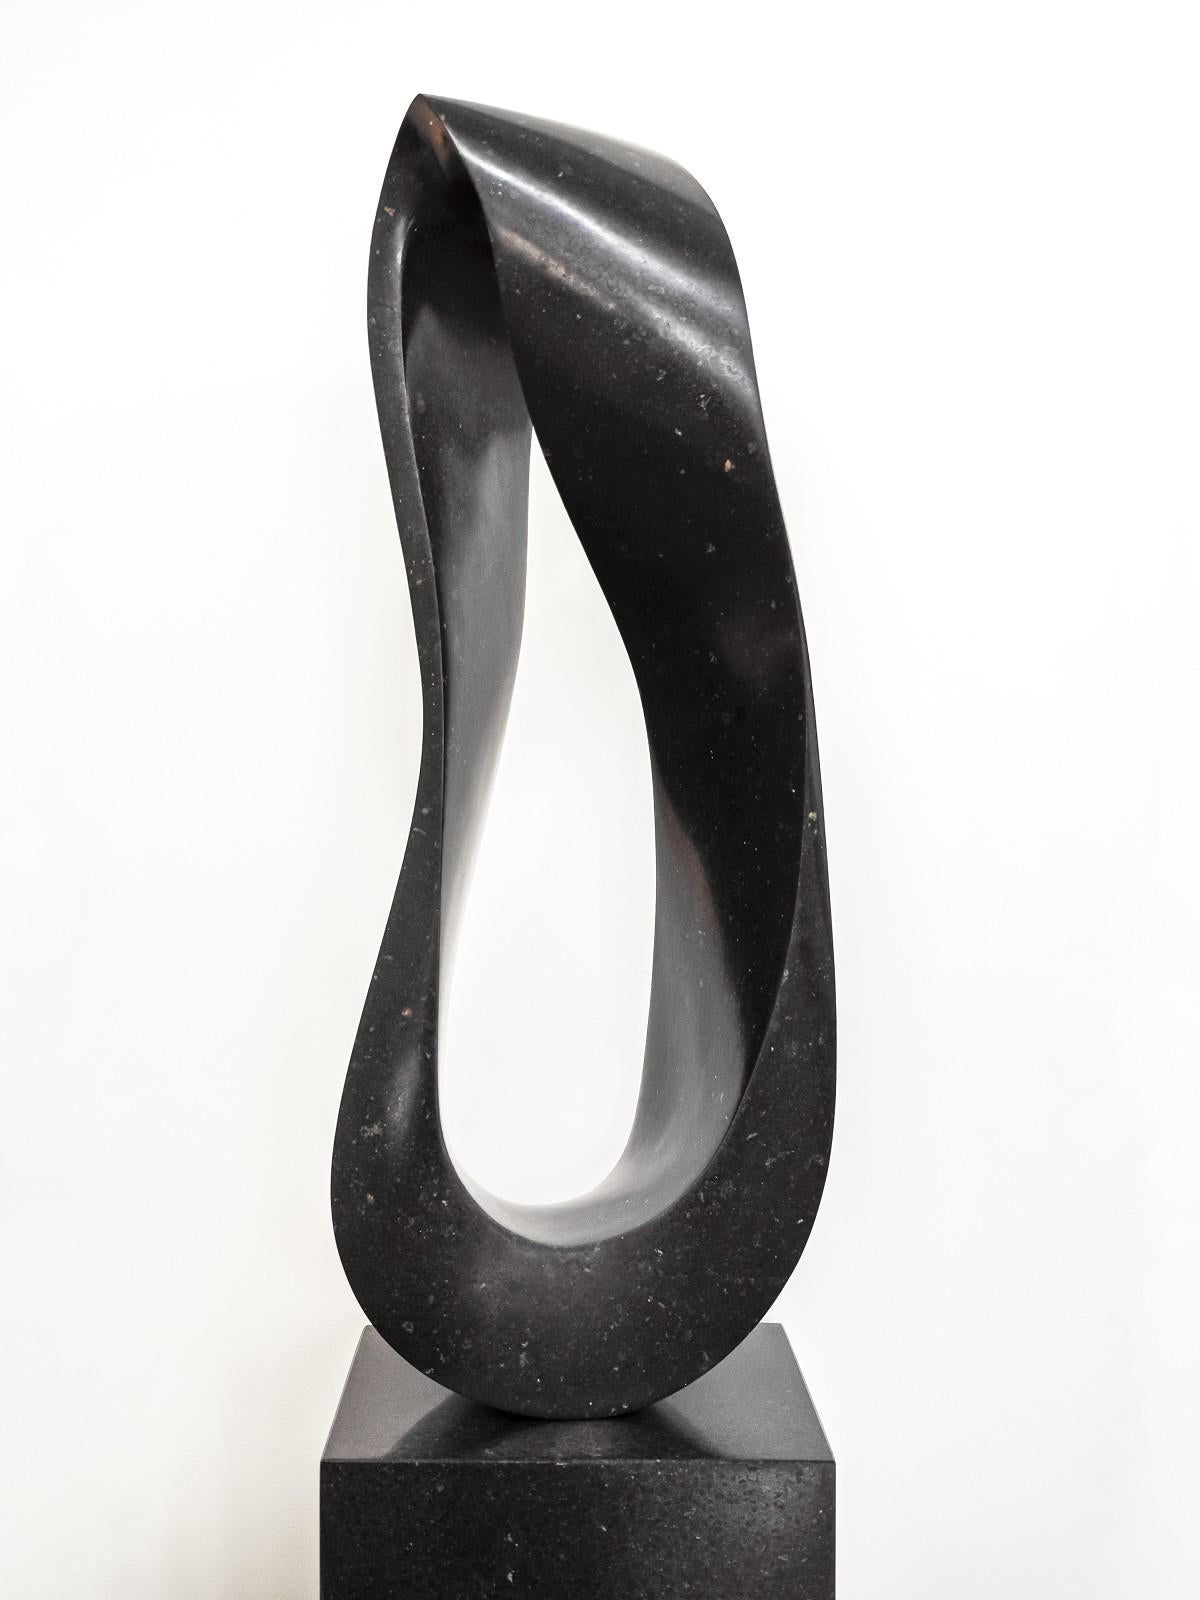 Mobius H3 12/50 - smooth, elegant, black granite, abstract sculpture on plinth - Contemporary Sculpture by Jeremy Guy